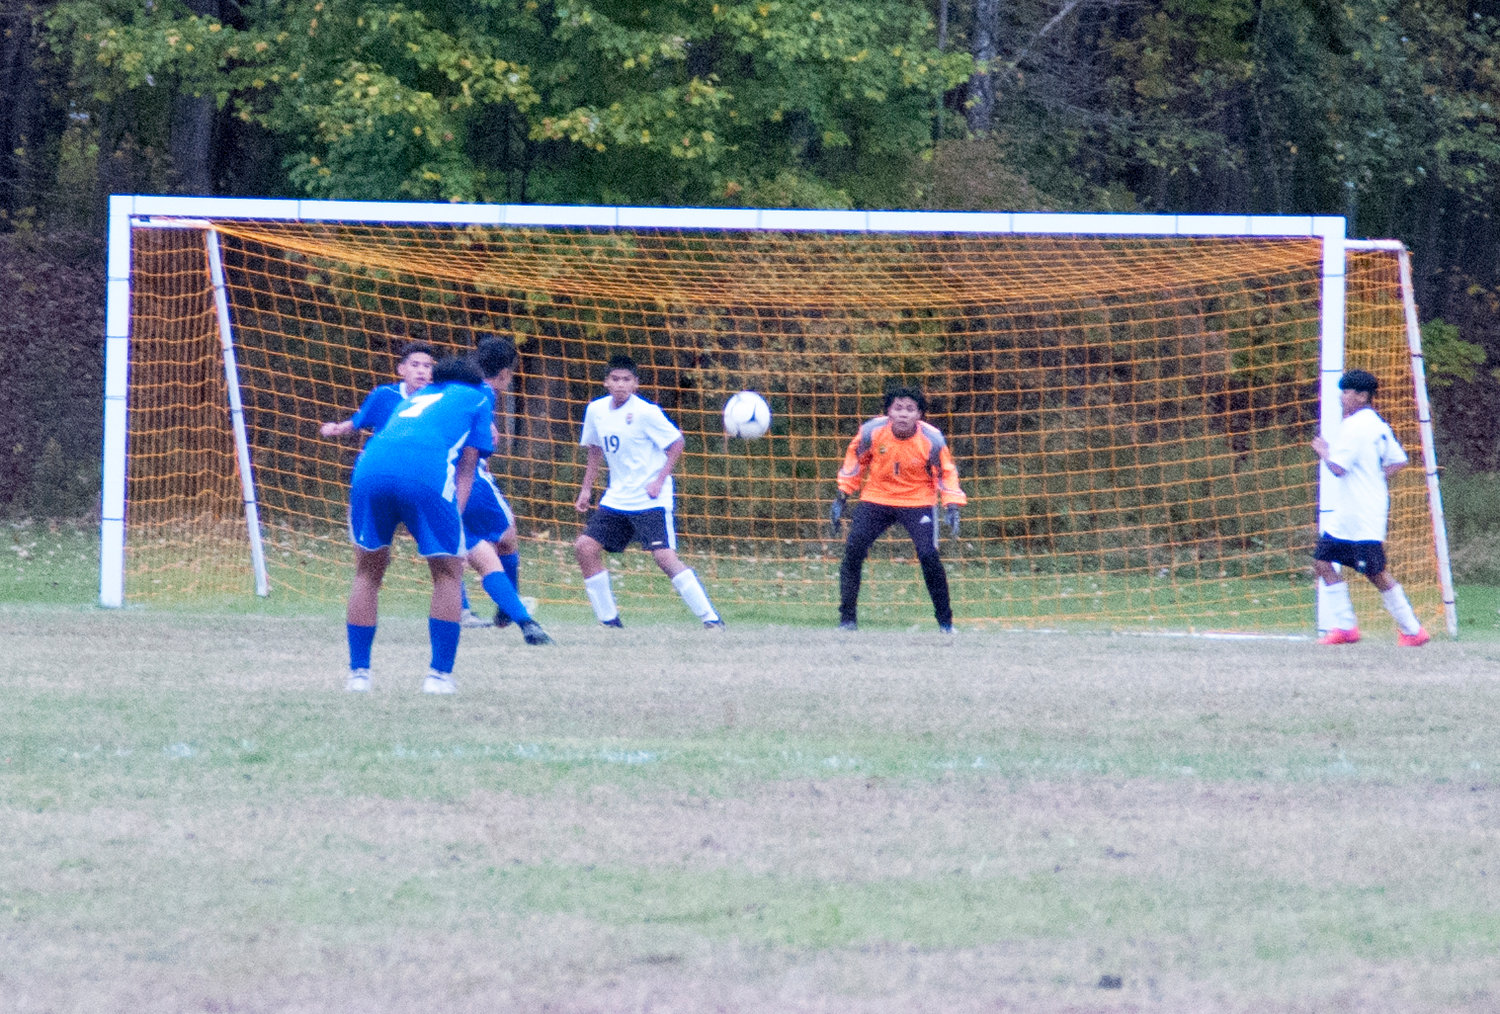 Fallsburg had a hard time slowing down Ellenville in the final minutes of the second half, allowing four goals to find the back of the net in the final 7 minutes of their playoff loss.